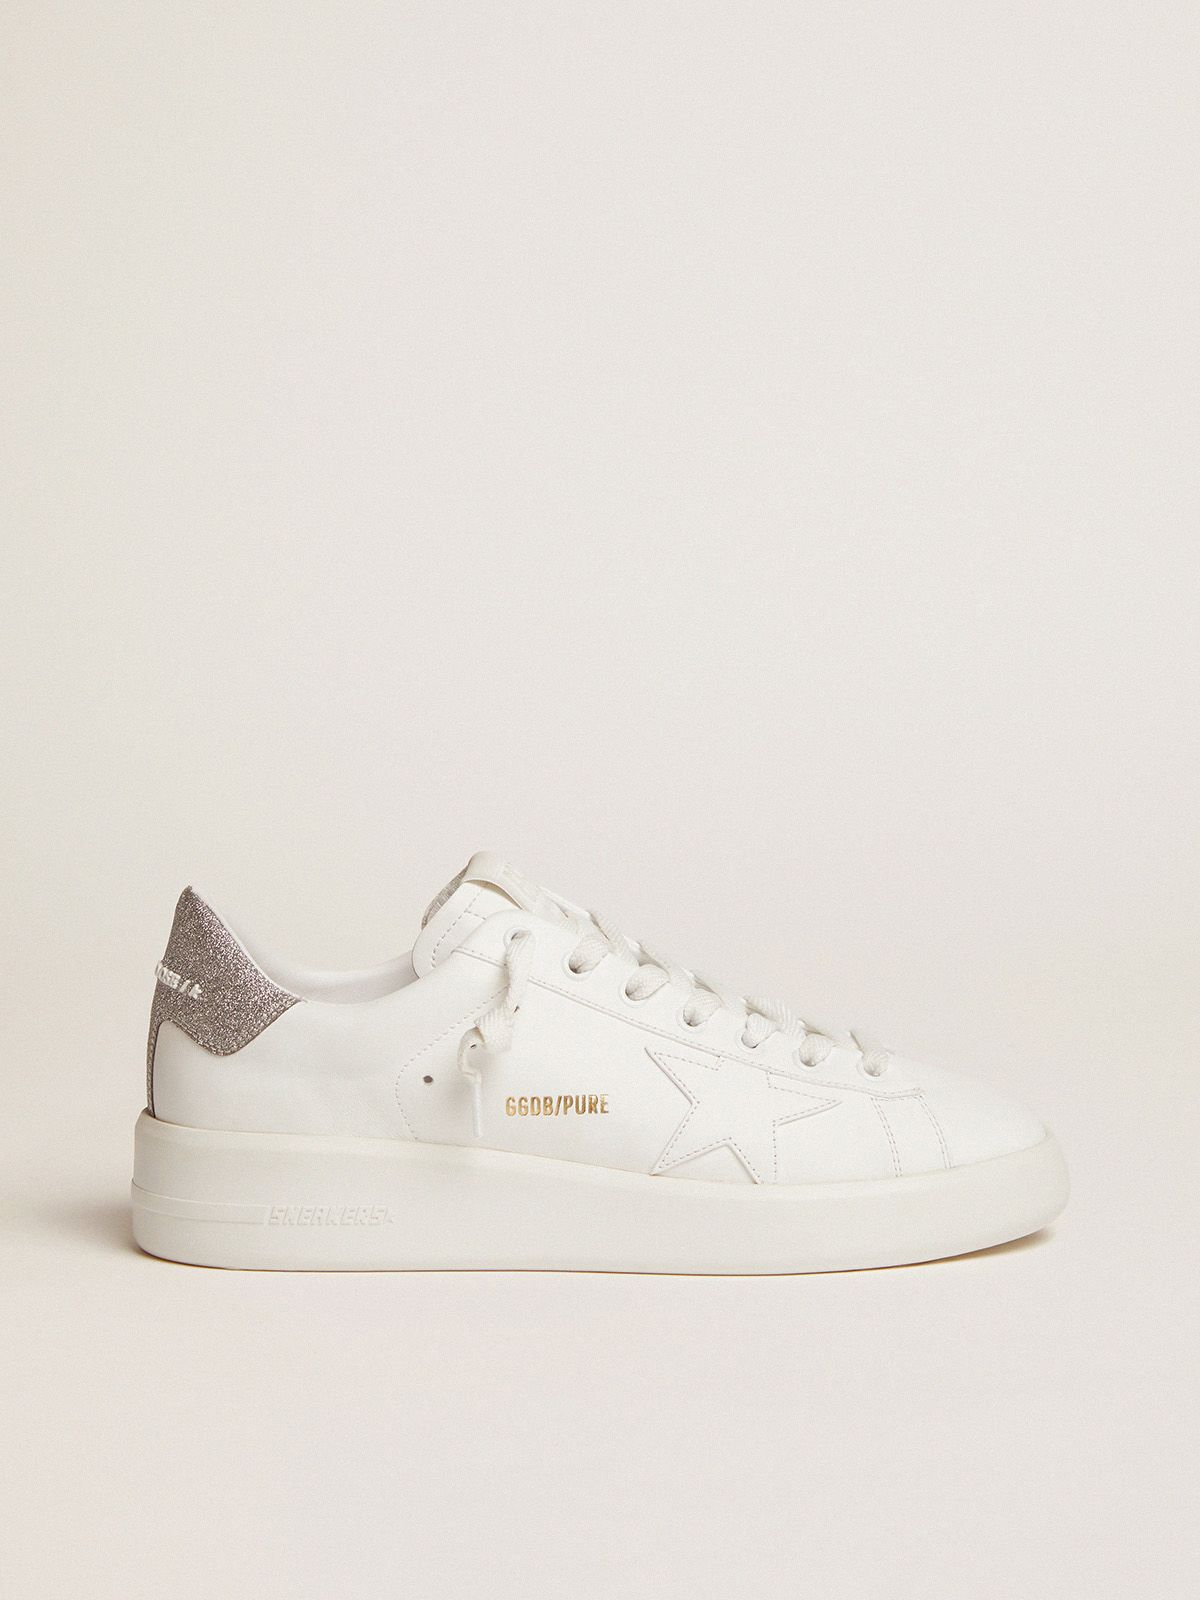 Sneakers Golden Goose Purestar sneakers with glittery silver heel tab